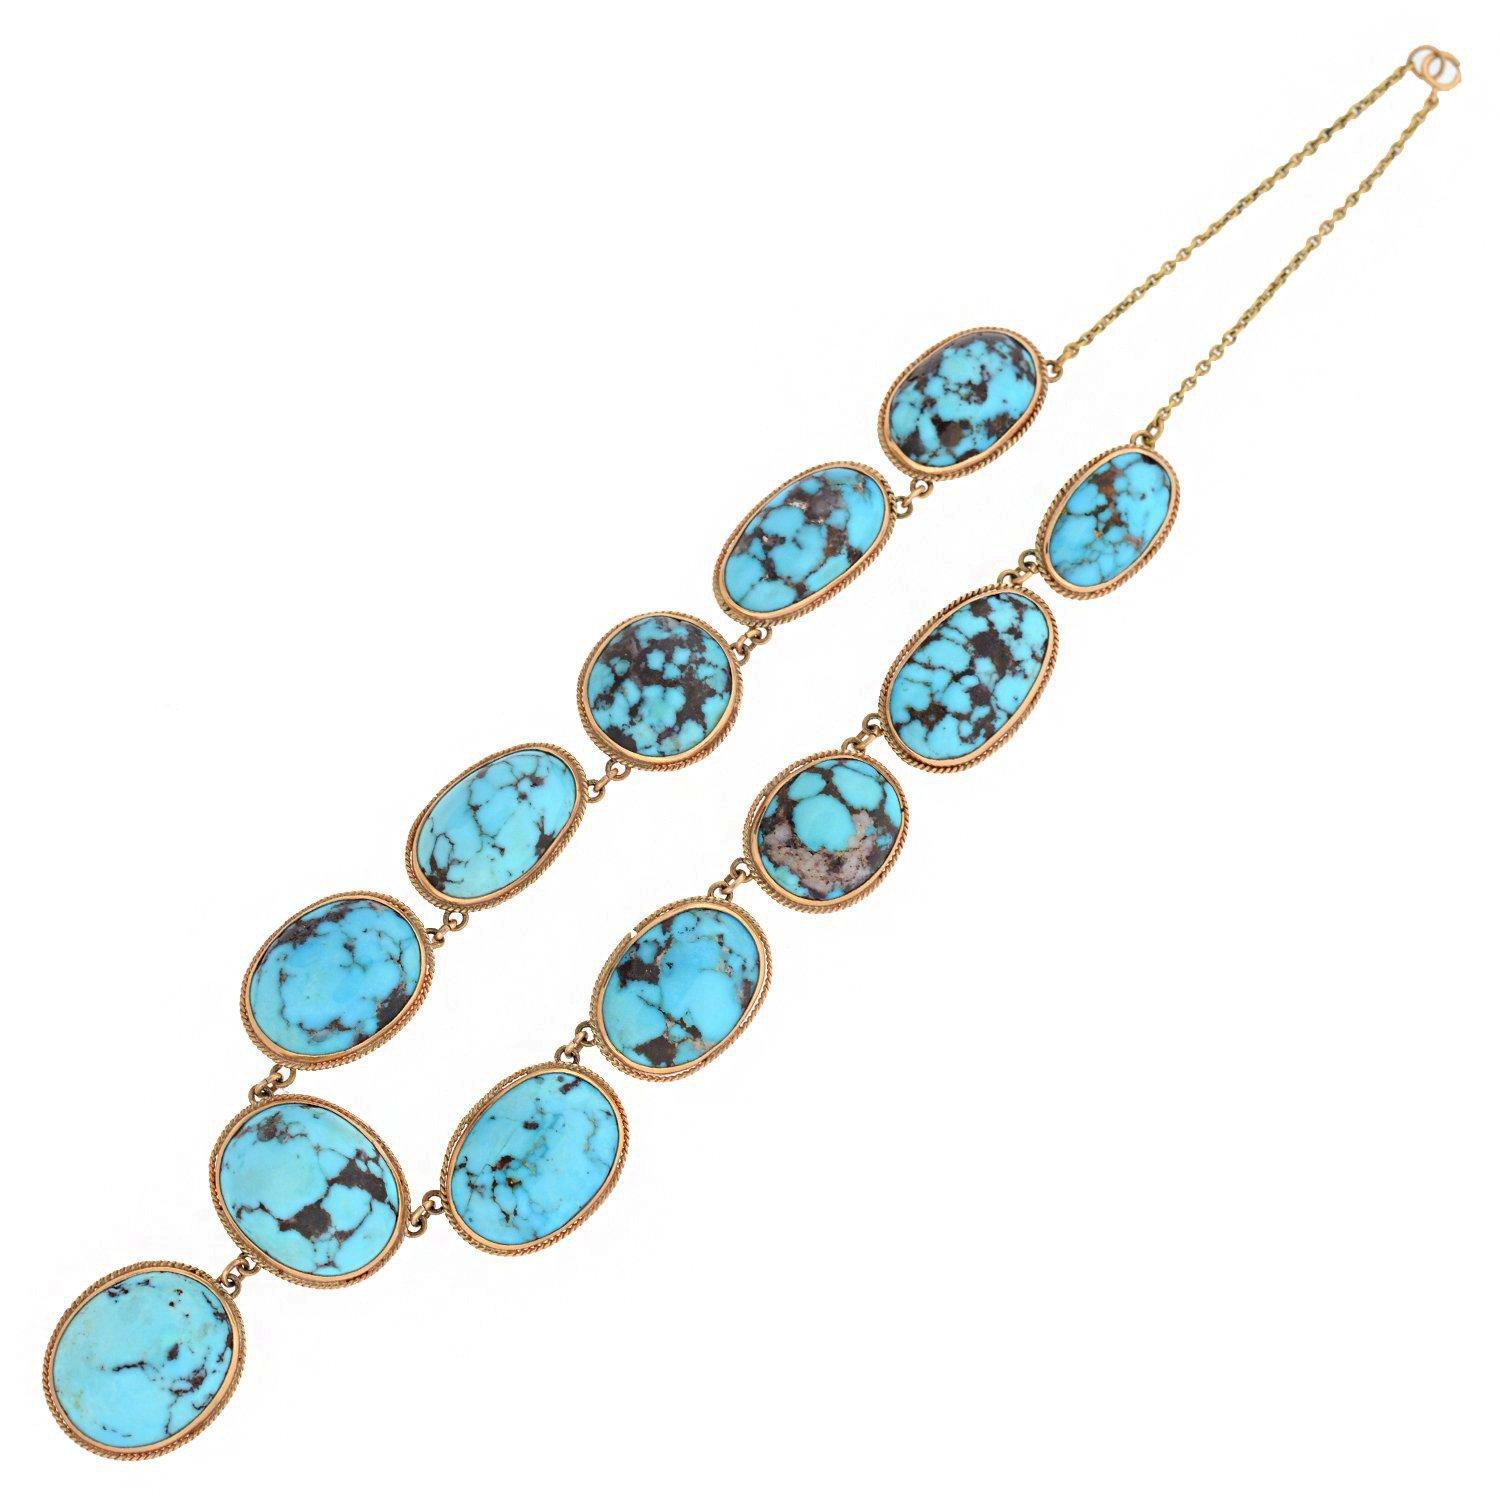 An outstanding turquoise necklace from the Edwardian (ca1910) era! This magnificent 14kt rose gold piece features twelve natural turquoise stone links that form a beautiful festoon style necklace. Dangling freely from the center is a round turquoise